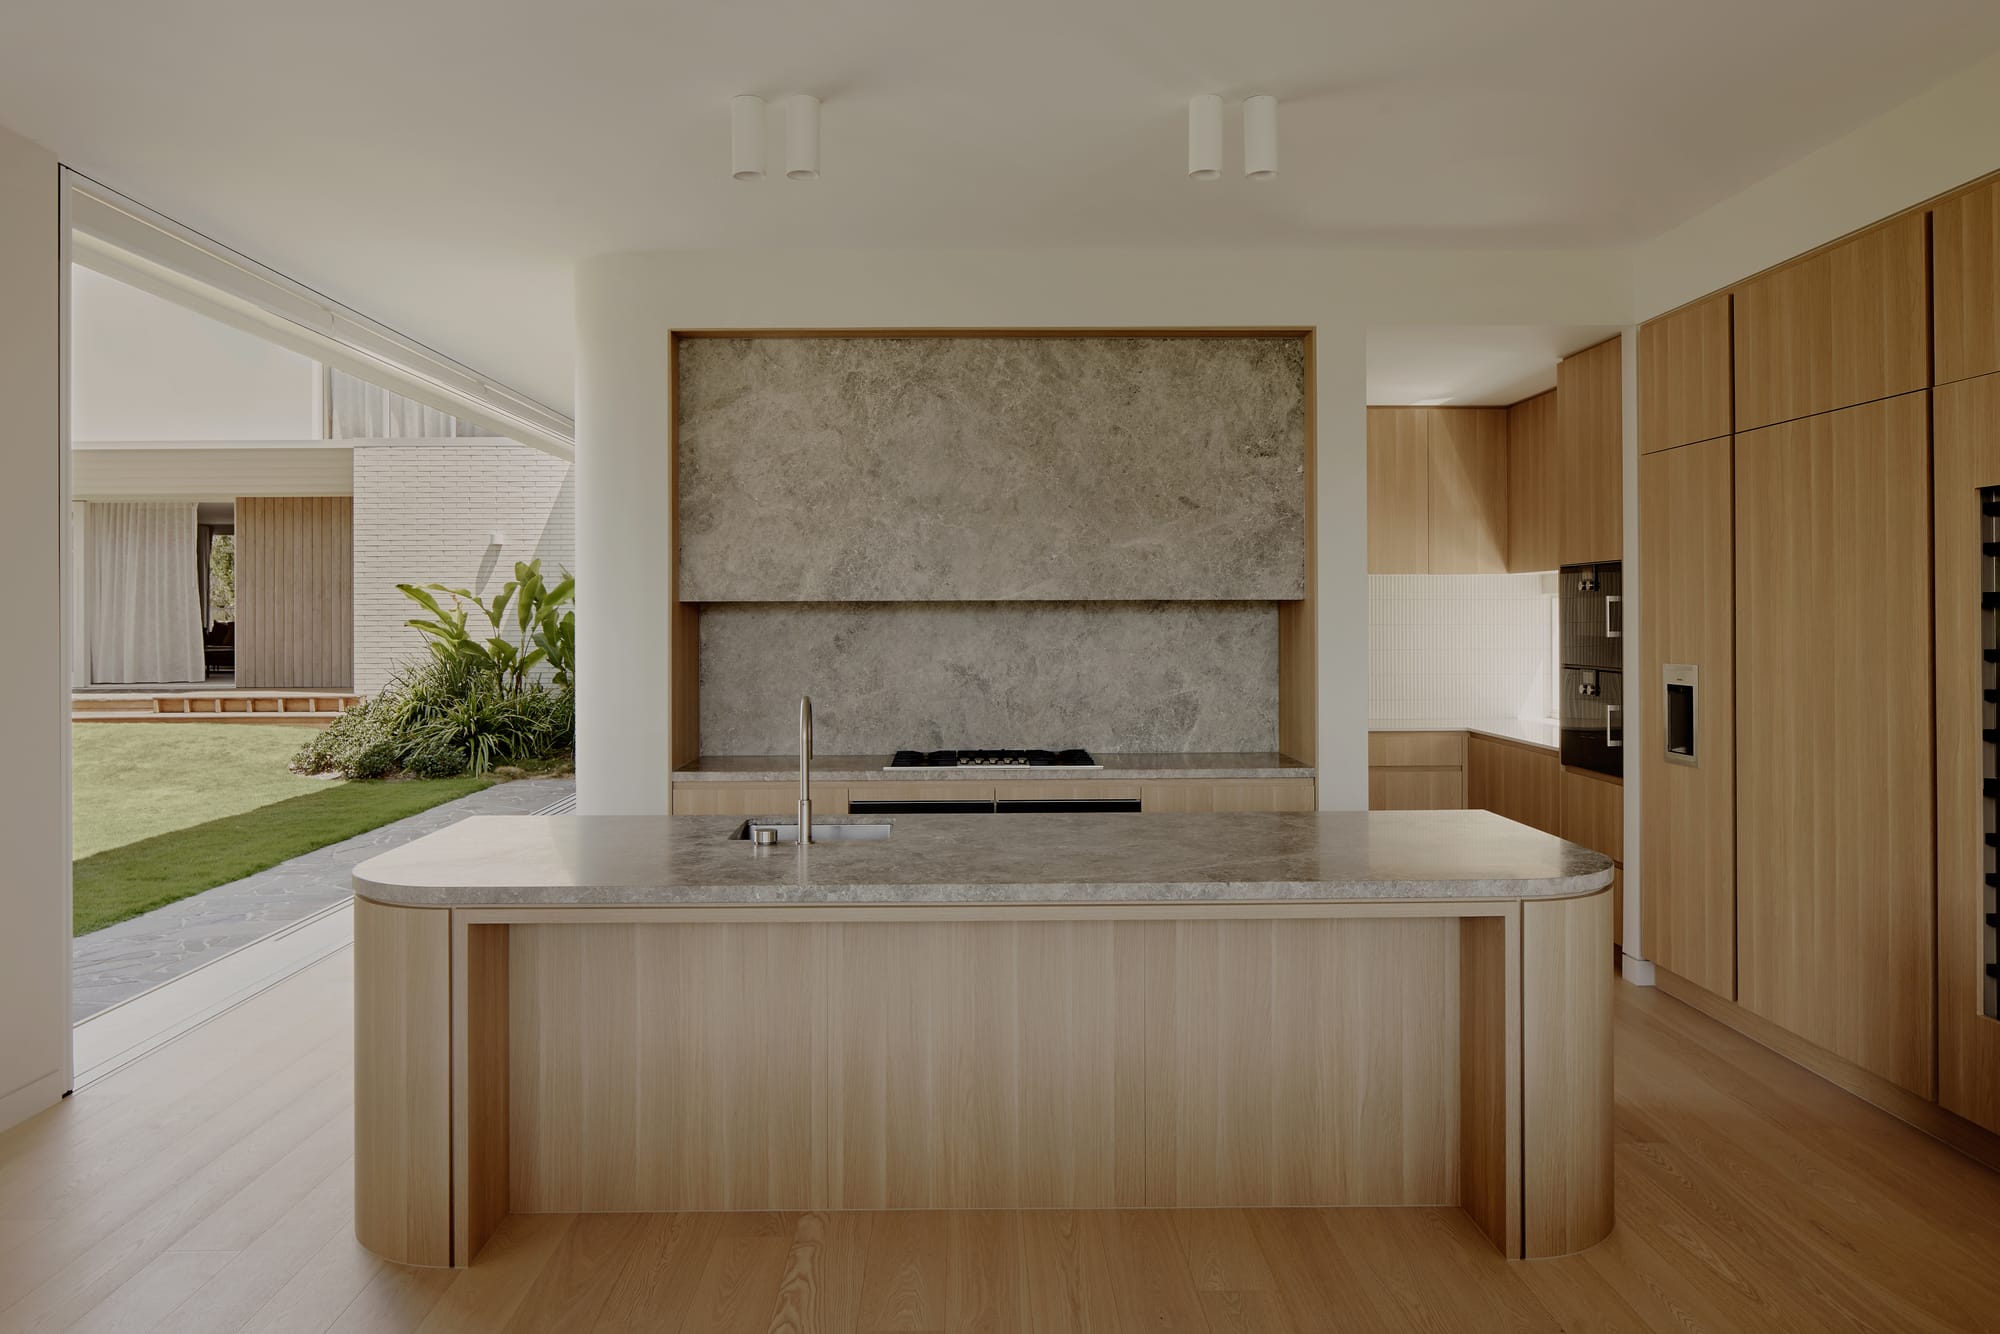 Hill Courtyard House by Kelder Architects. Photography by Brock Beazley Photography. Kitchen with timber floors, island bench, joinery. Stone benchtop and splashback. Opening onto green courtyard to the left. 